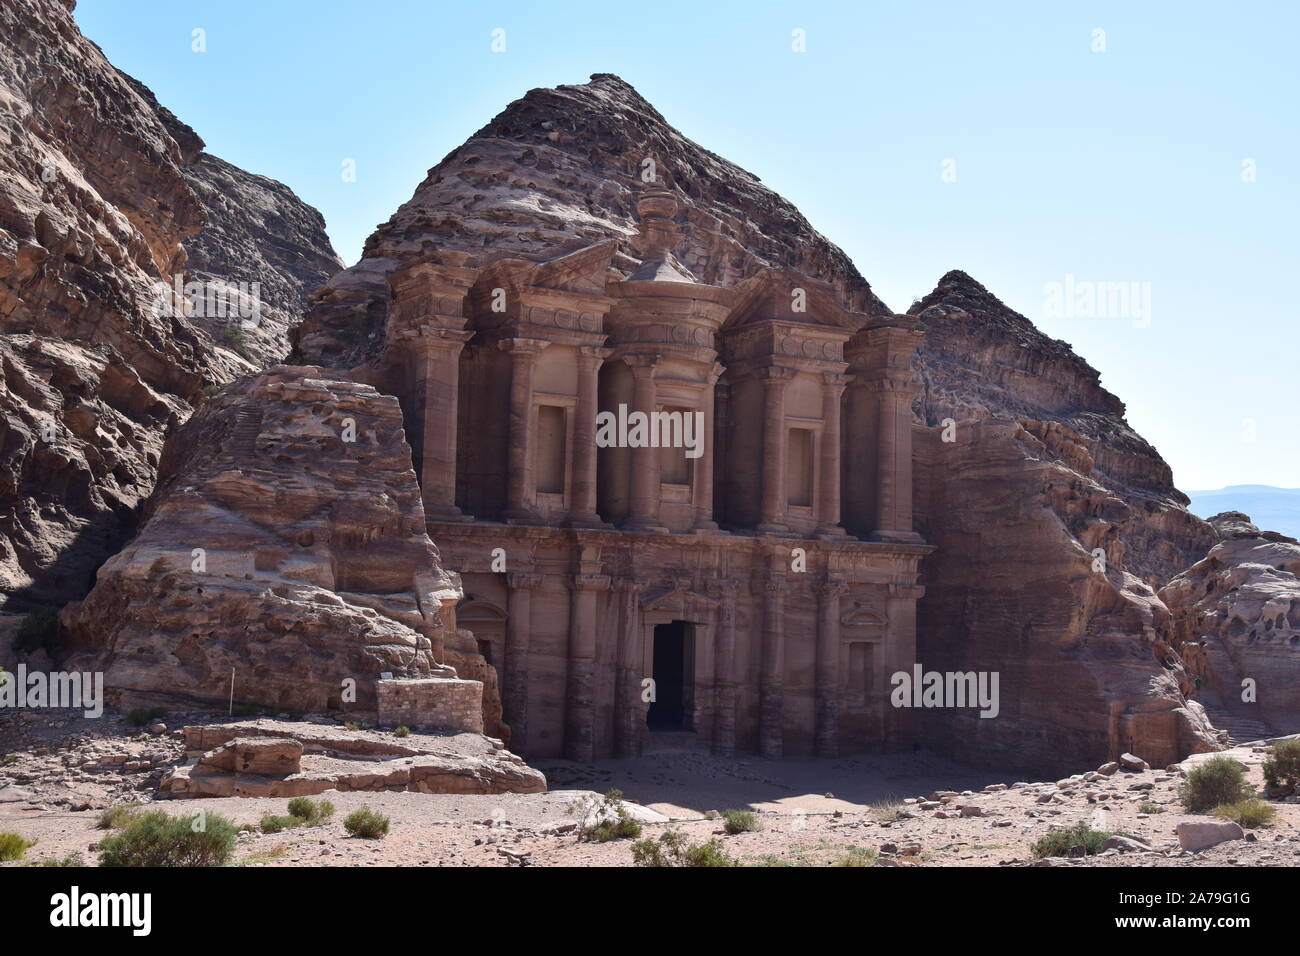 The monastry in the ancient city of Petra in Jordan Stock Photo